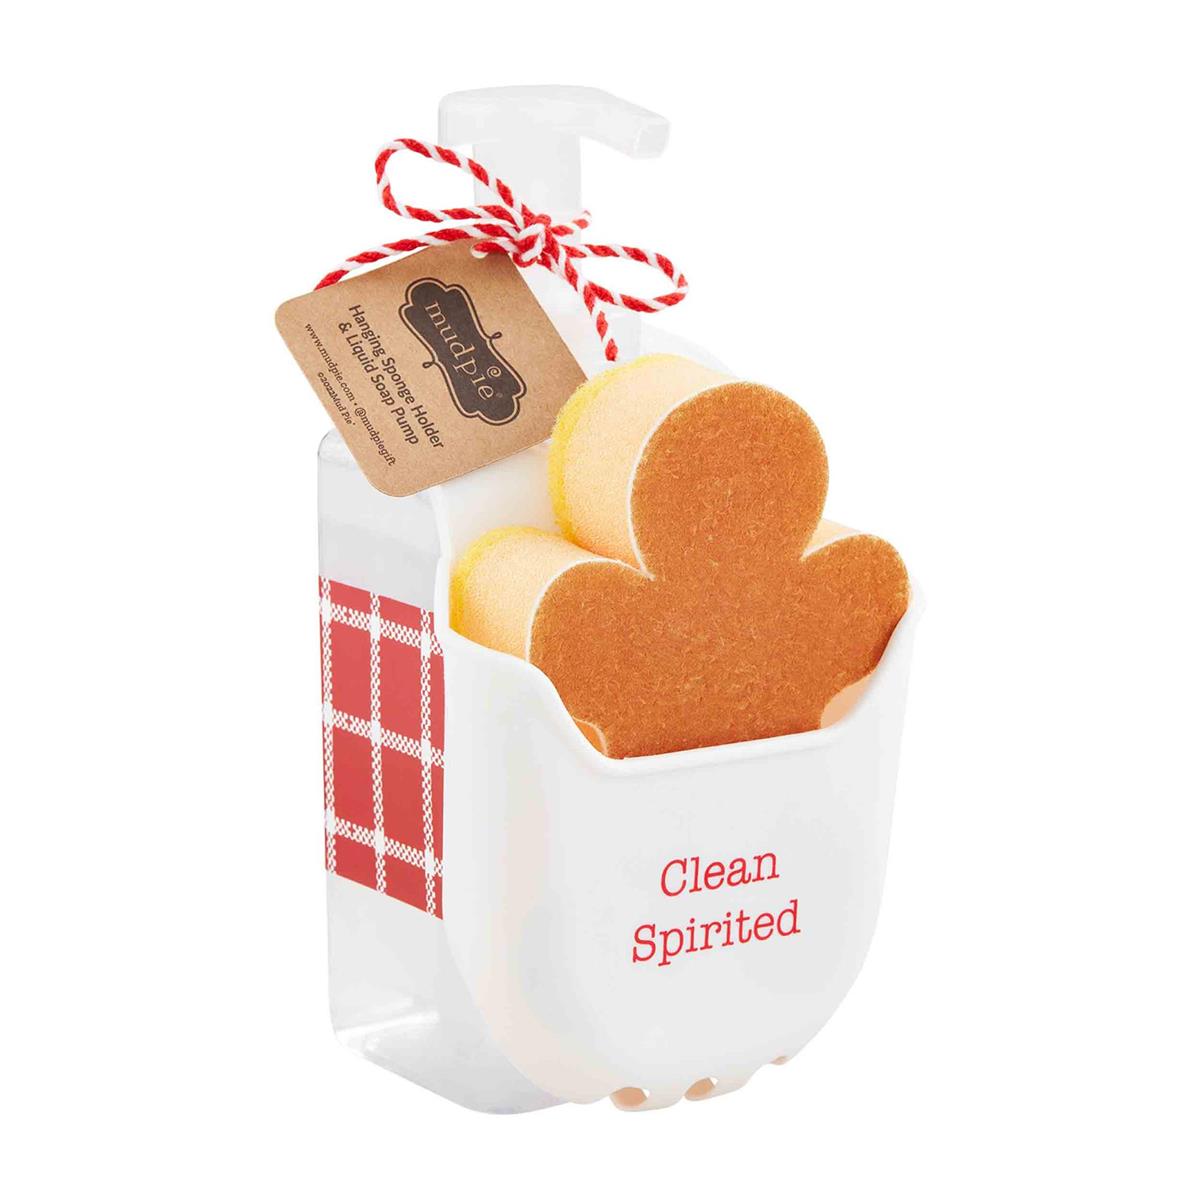 Christmas Soap & Sponge Caddy Sets by Mud Pie